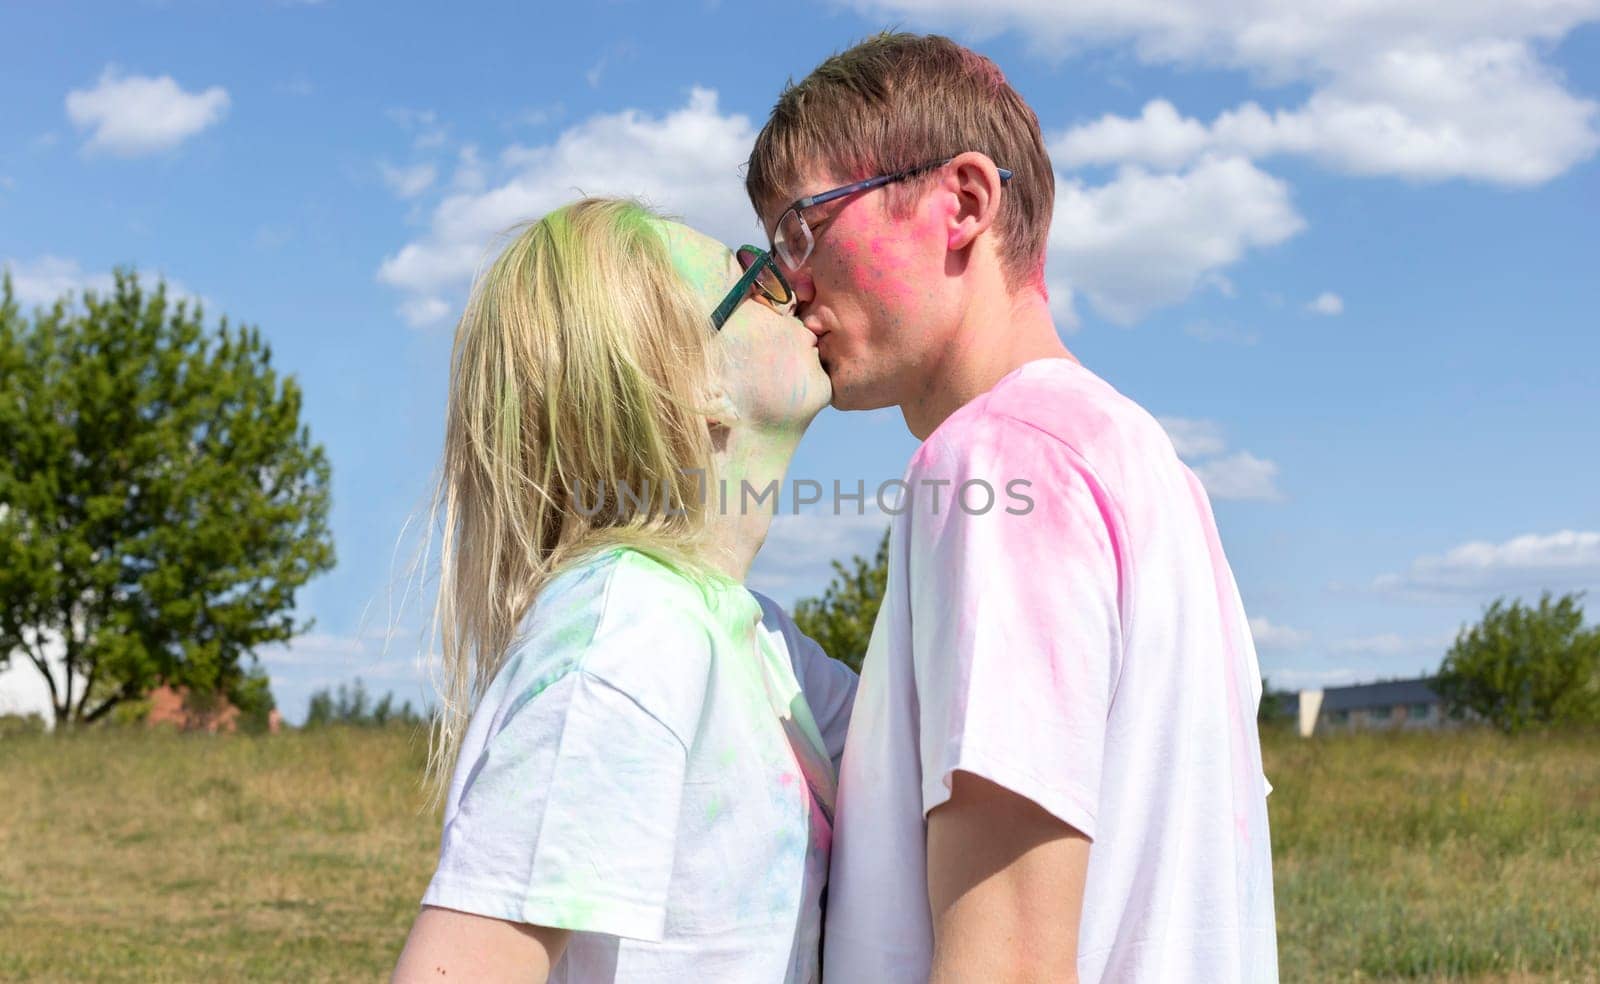 Romantic Caucasian Couple Adults Kiss With Colorful Paint, Powder On Clothes On Holi Color Festival. Emotional Happy Man and Woman. Blue Sky, Green Trees On Background, Sunny Day. Horizontal Plane.